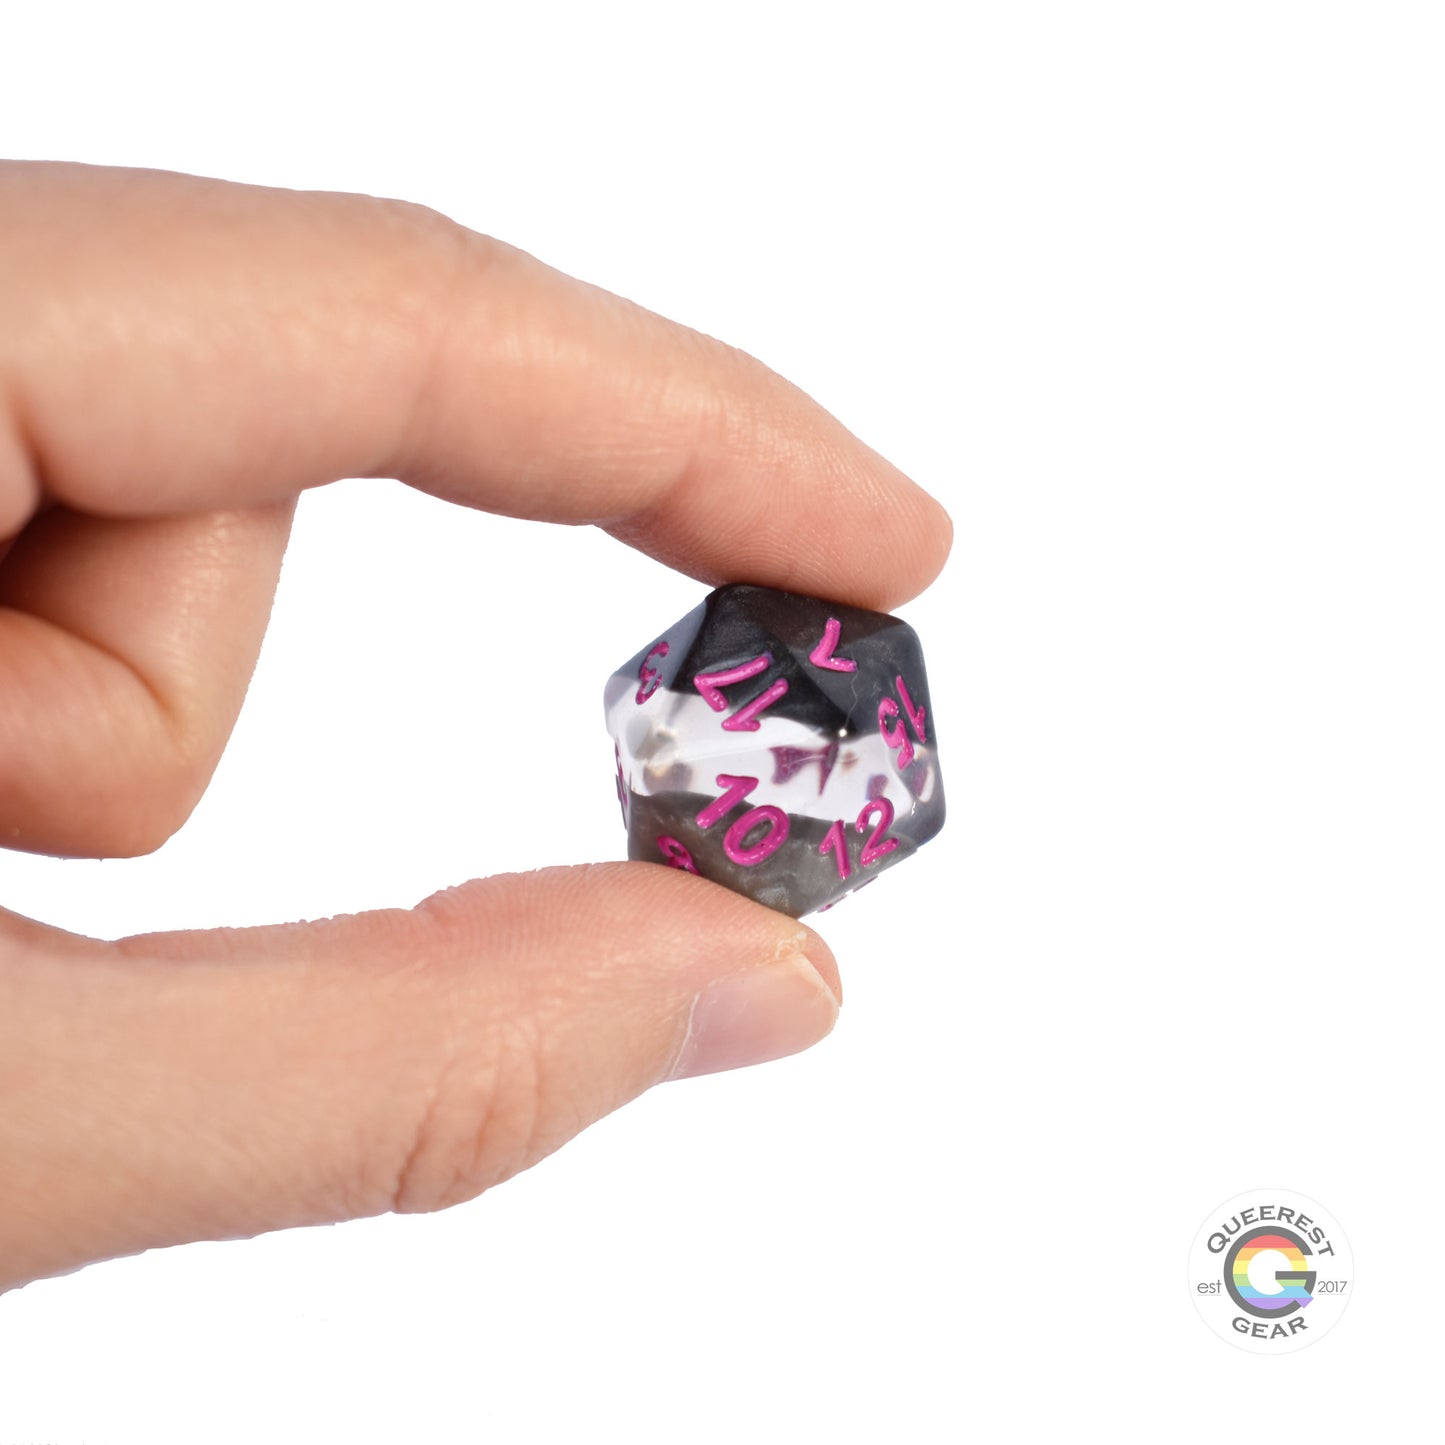 A hand holding up the demisexual d20 to show off the color and transparency